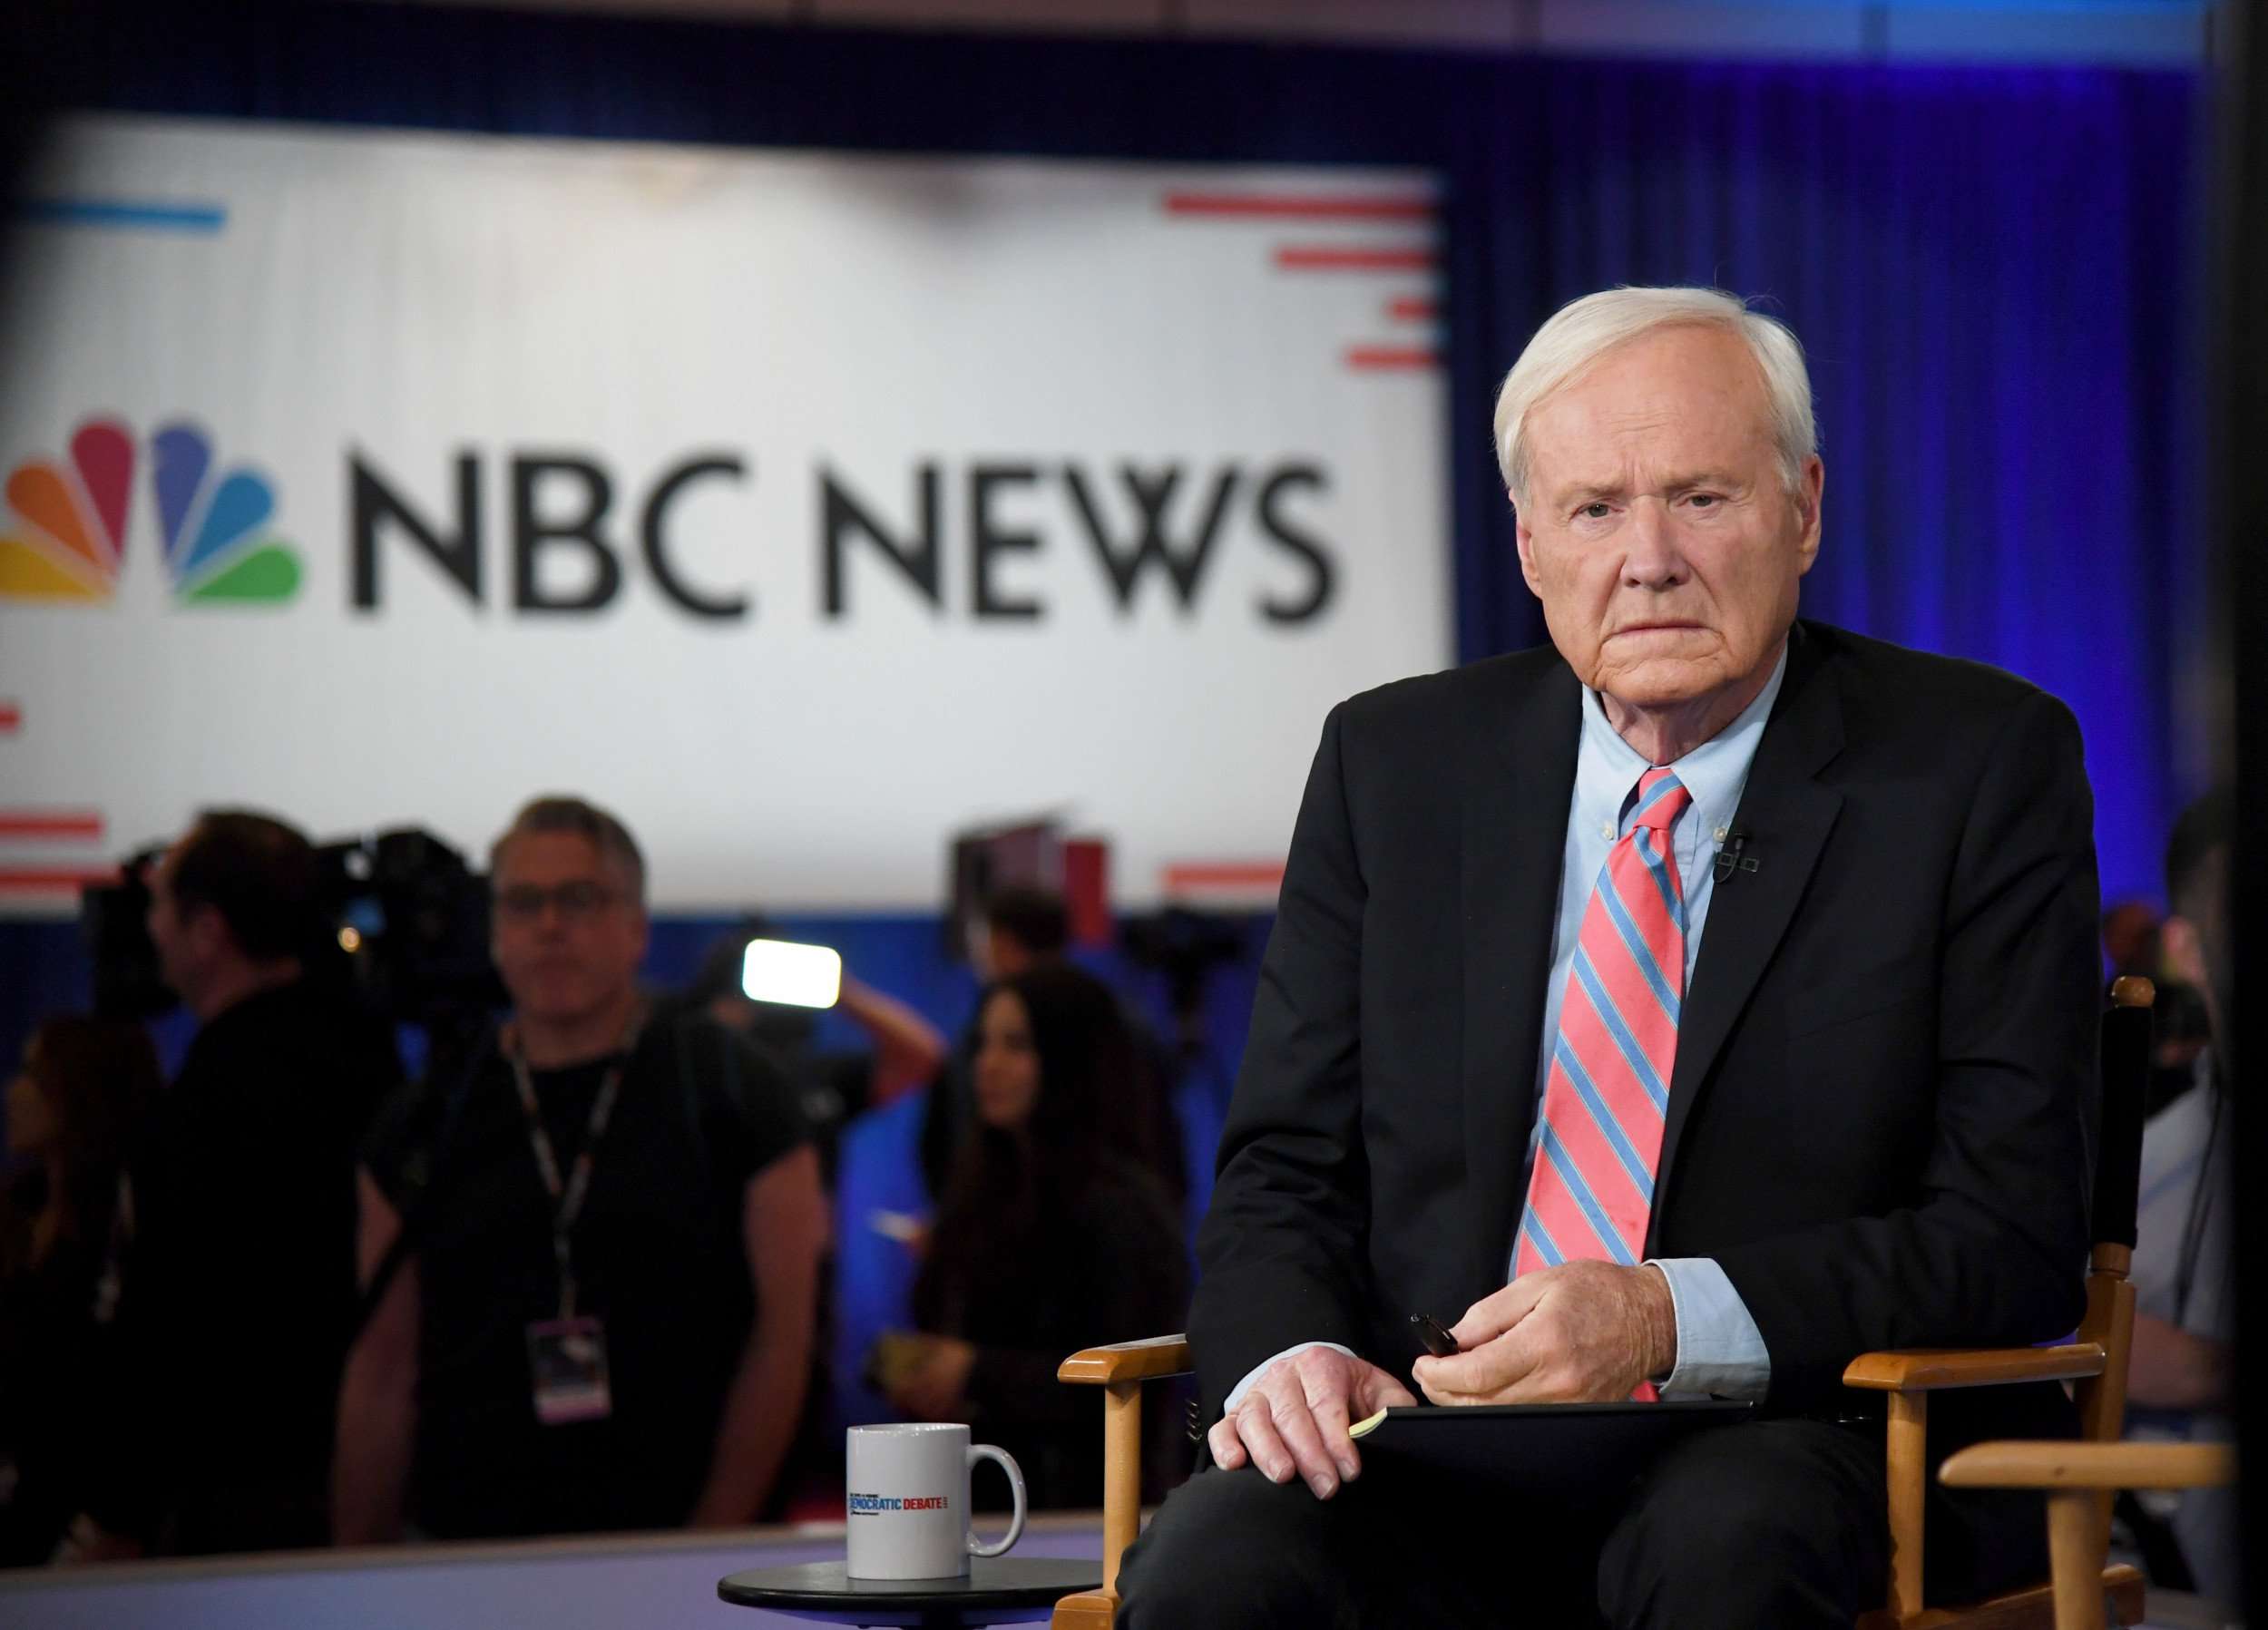 image for MSNBC's Chris Matthews Faces Calls To Resign After Comparing Sanders' Nevada Victory To Nazi Germany's Defeat Of France